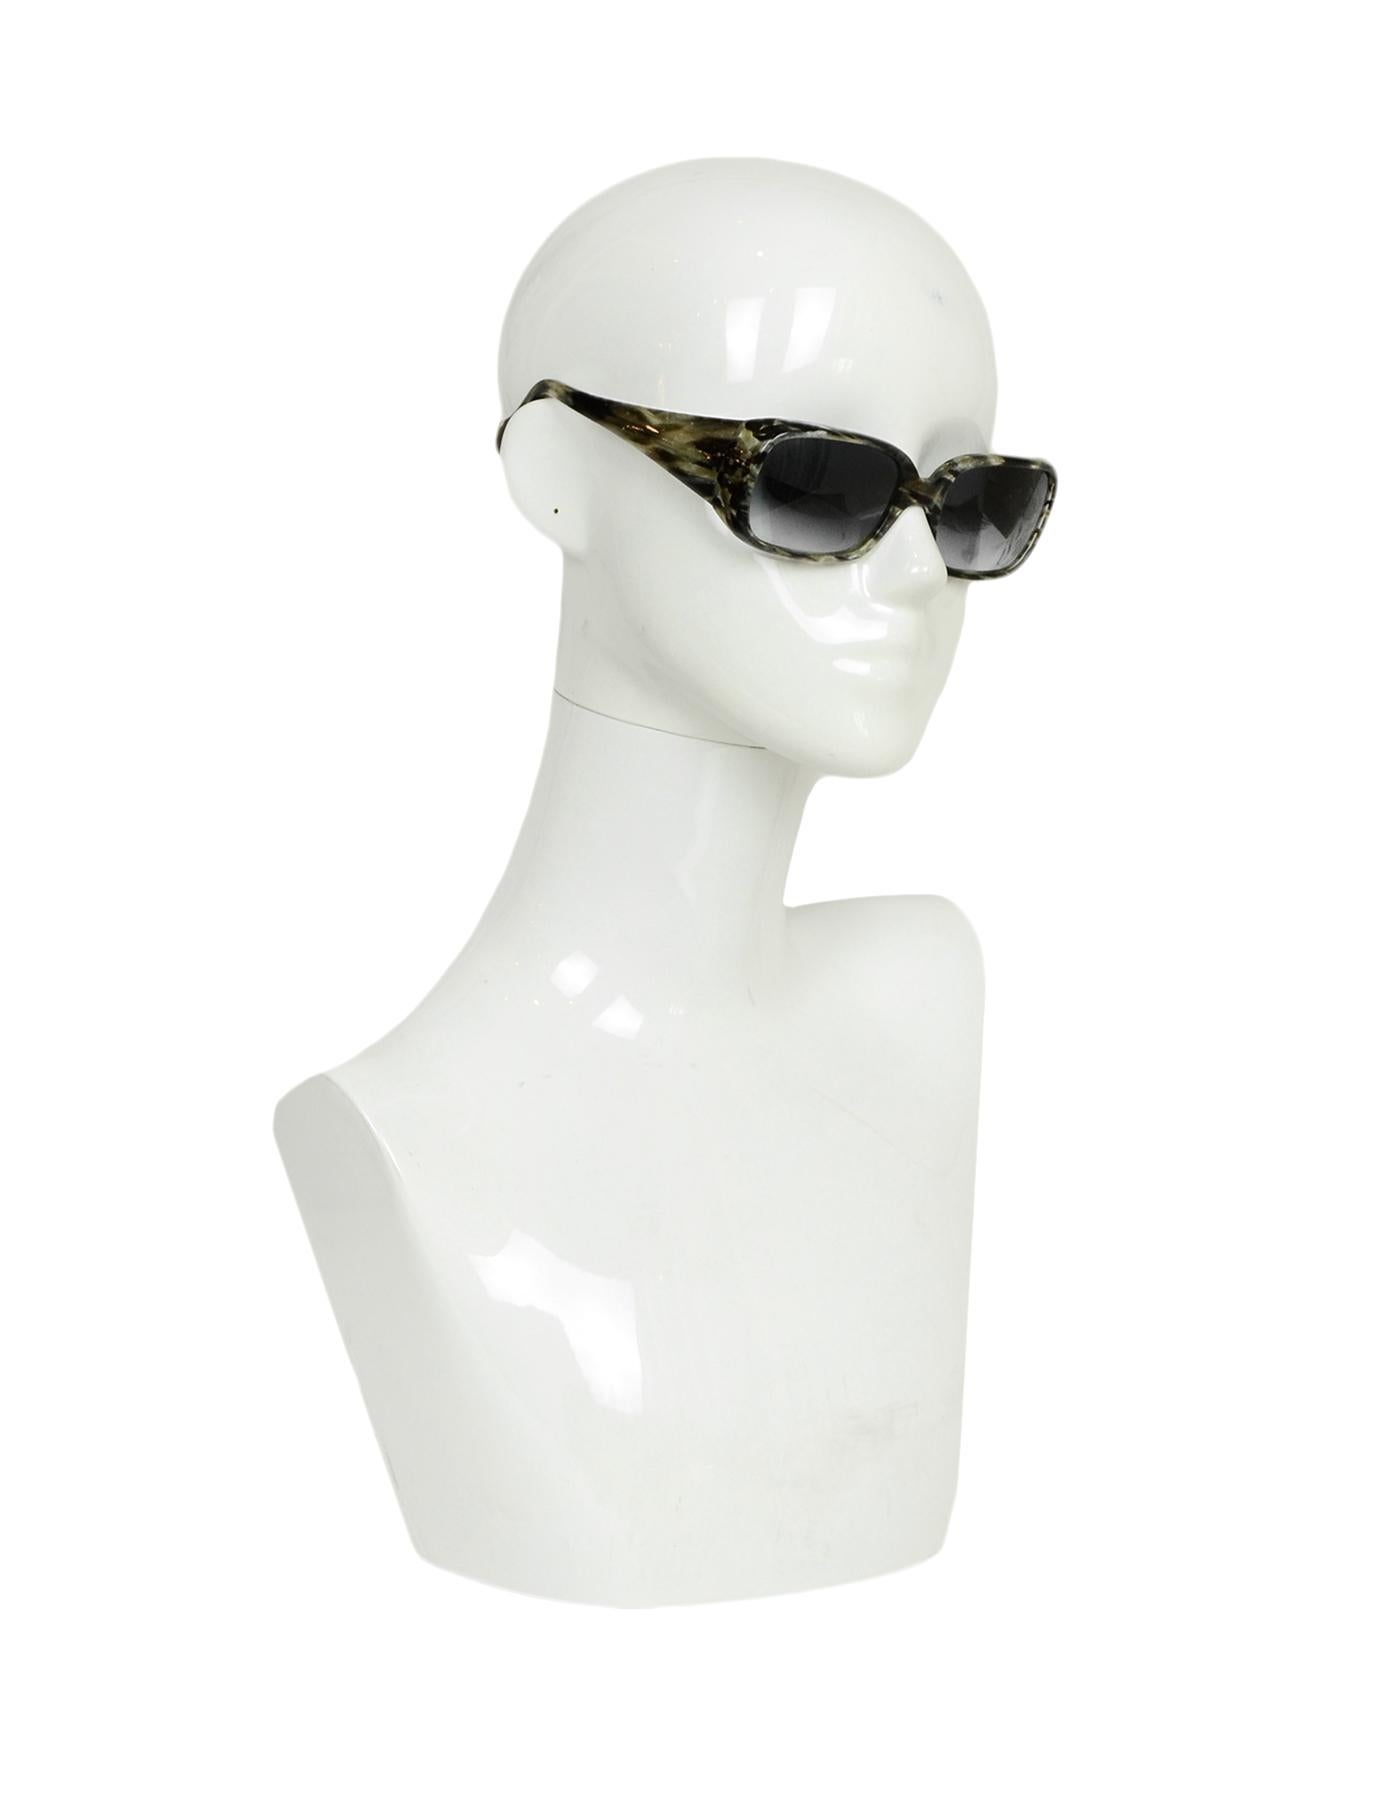 Morgenthal Frederics Grey Tortoise Elektra XL Sunglasses

Made In: France
Color: Grey
Hardware: Silvertone
Materials: Metal, Plastic
Overall Condition: Very good pre-owned condition, minor wear on the front

Measurements: 
Length Across Front: